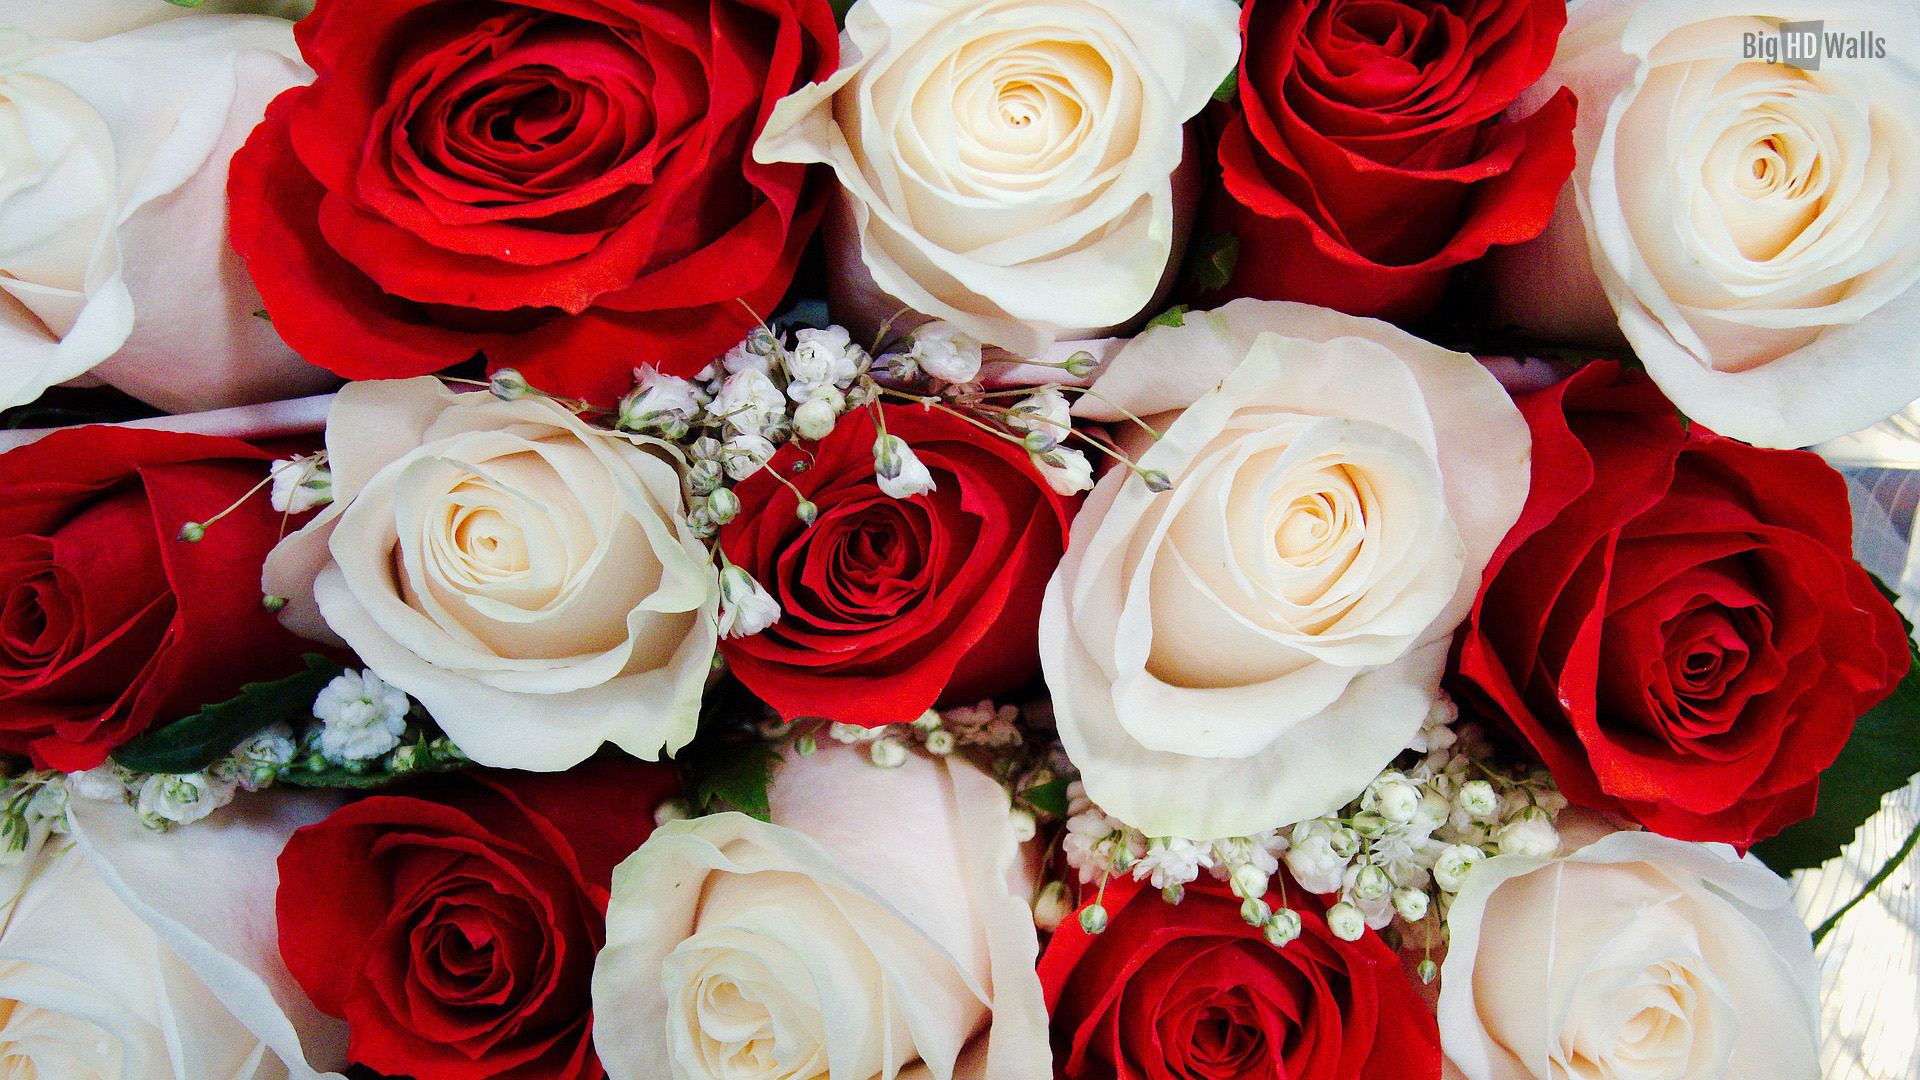 Beautiful White And Red Roses BigHDwalls